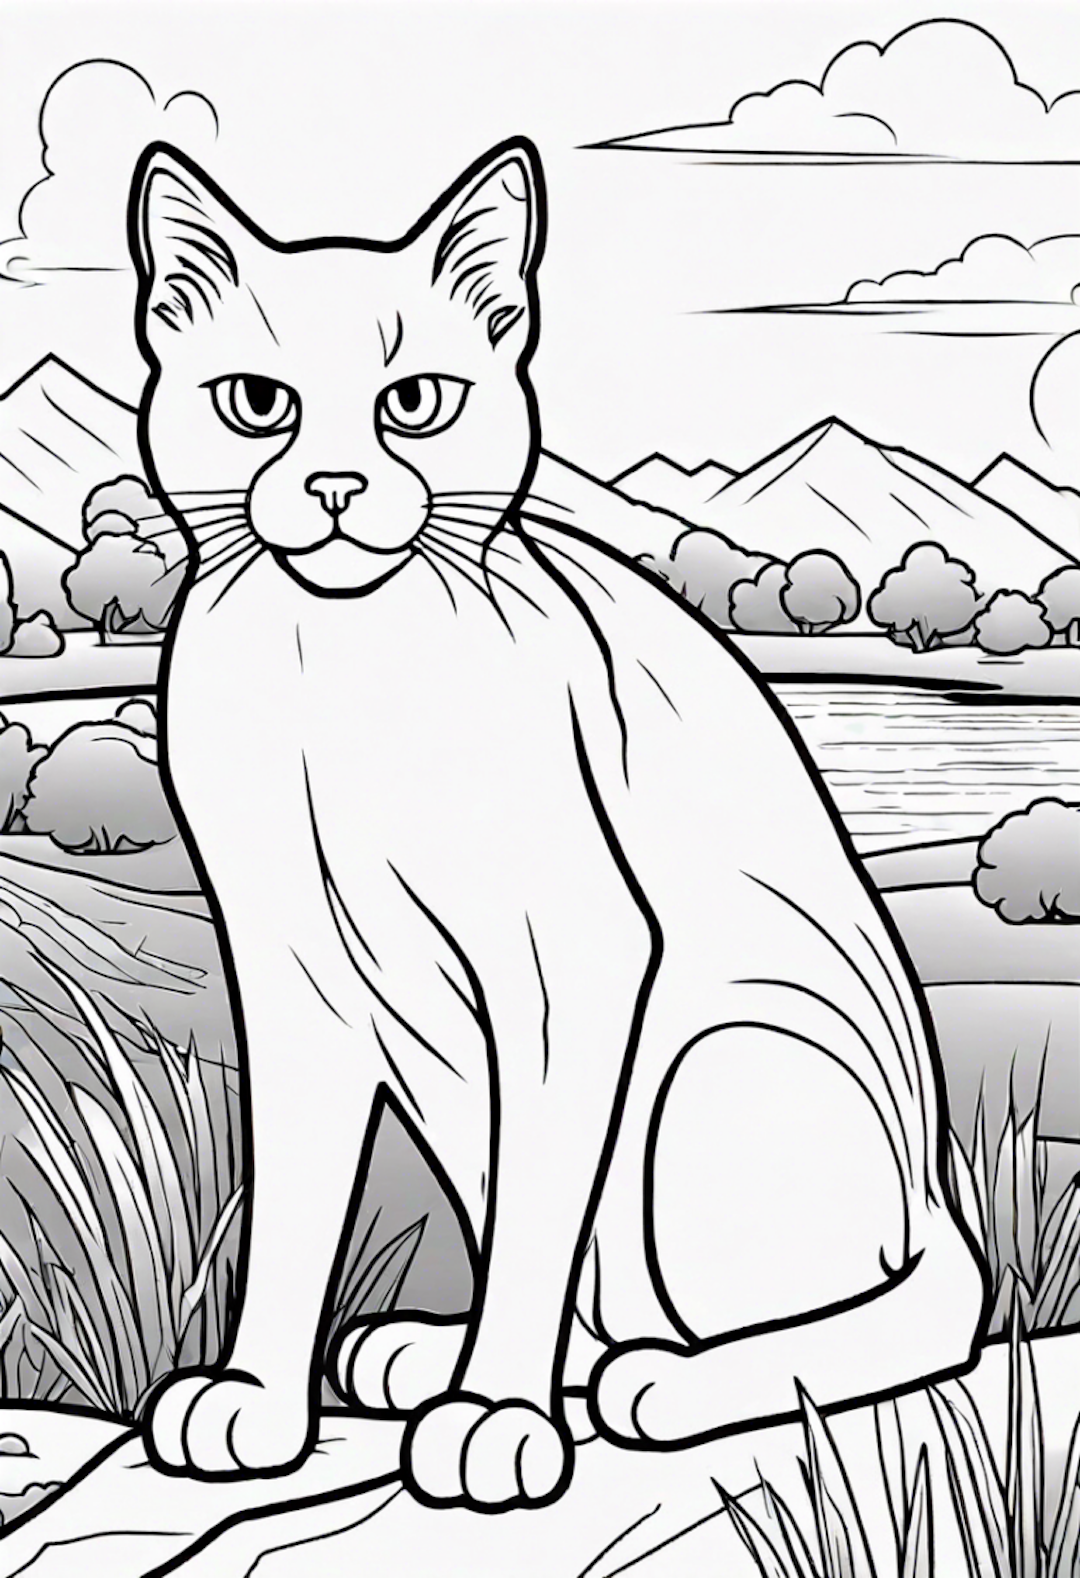 Flash Cat coloring pages